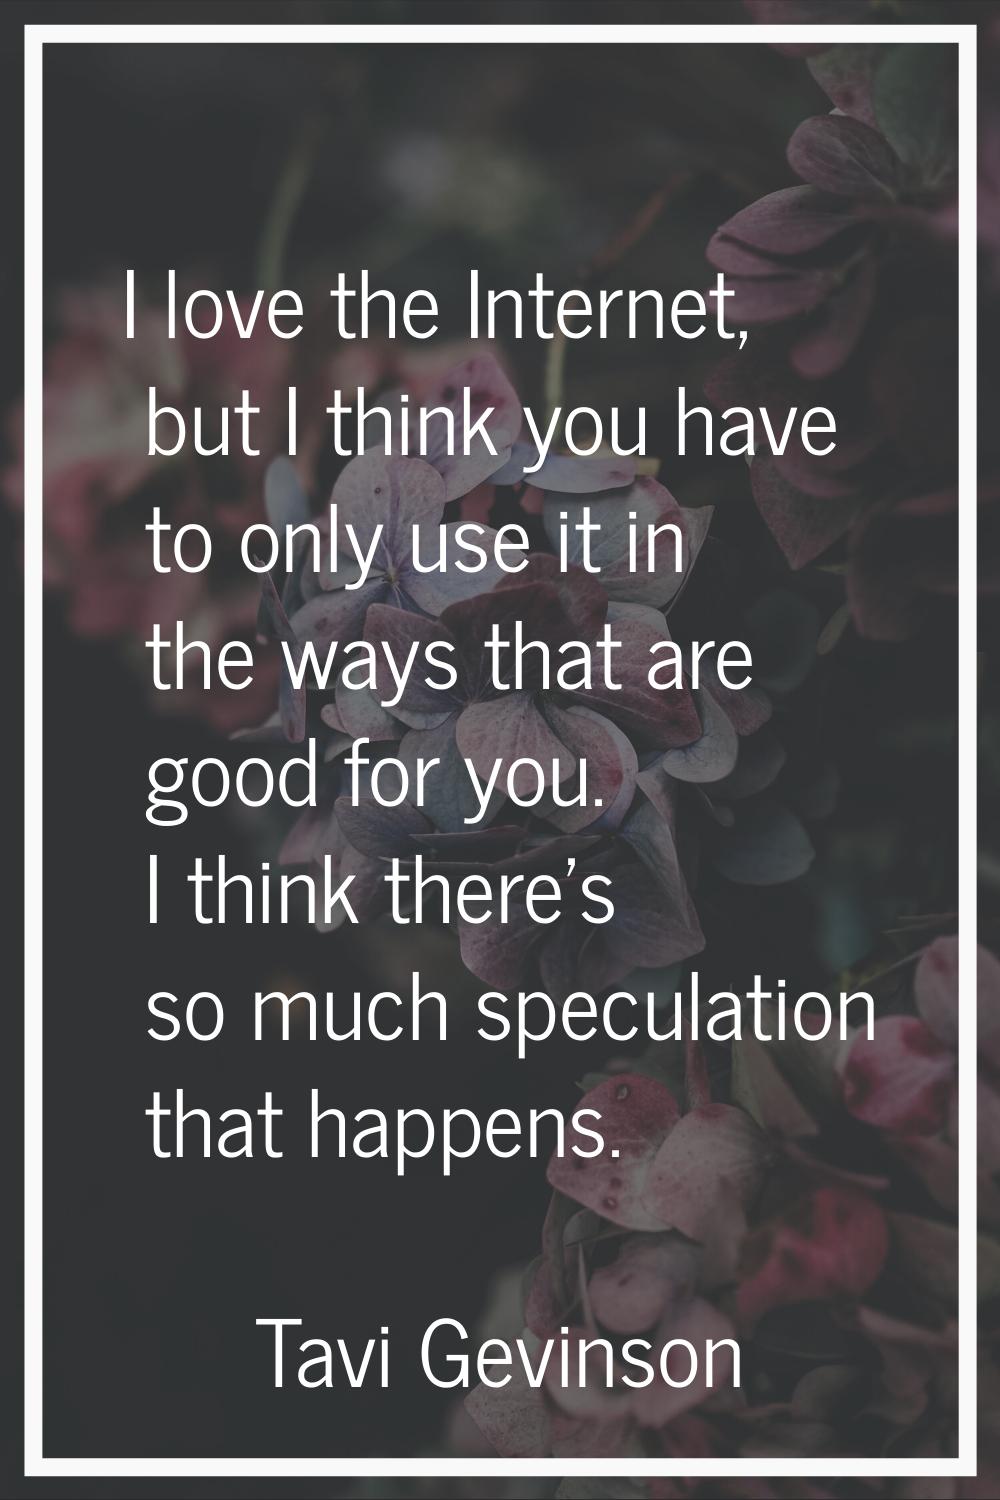 I love the Internet, but I think you have to only use it in the ways that are good for you. I think